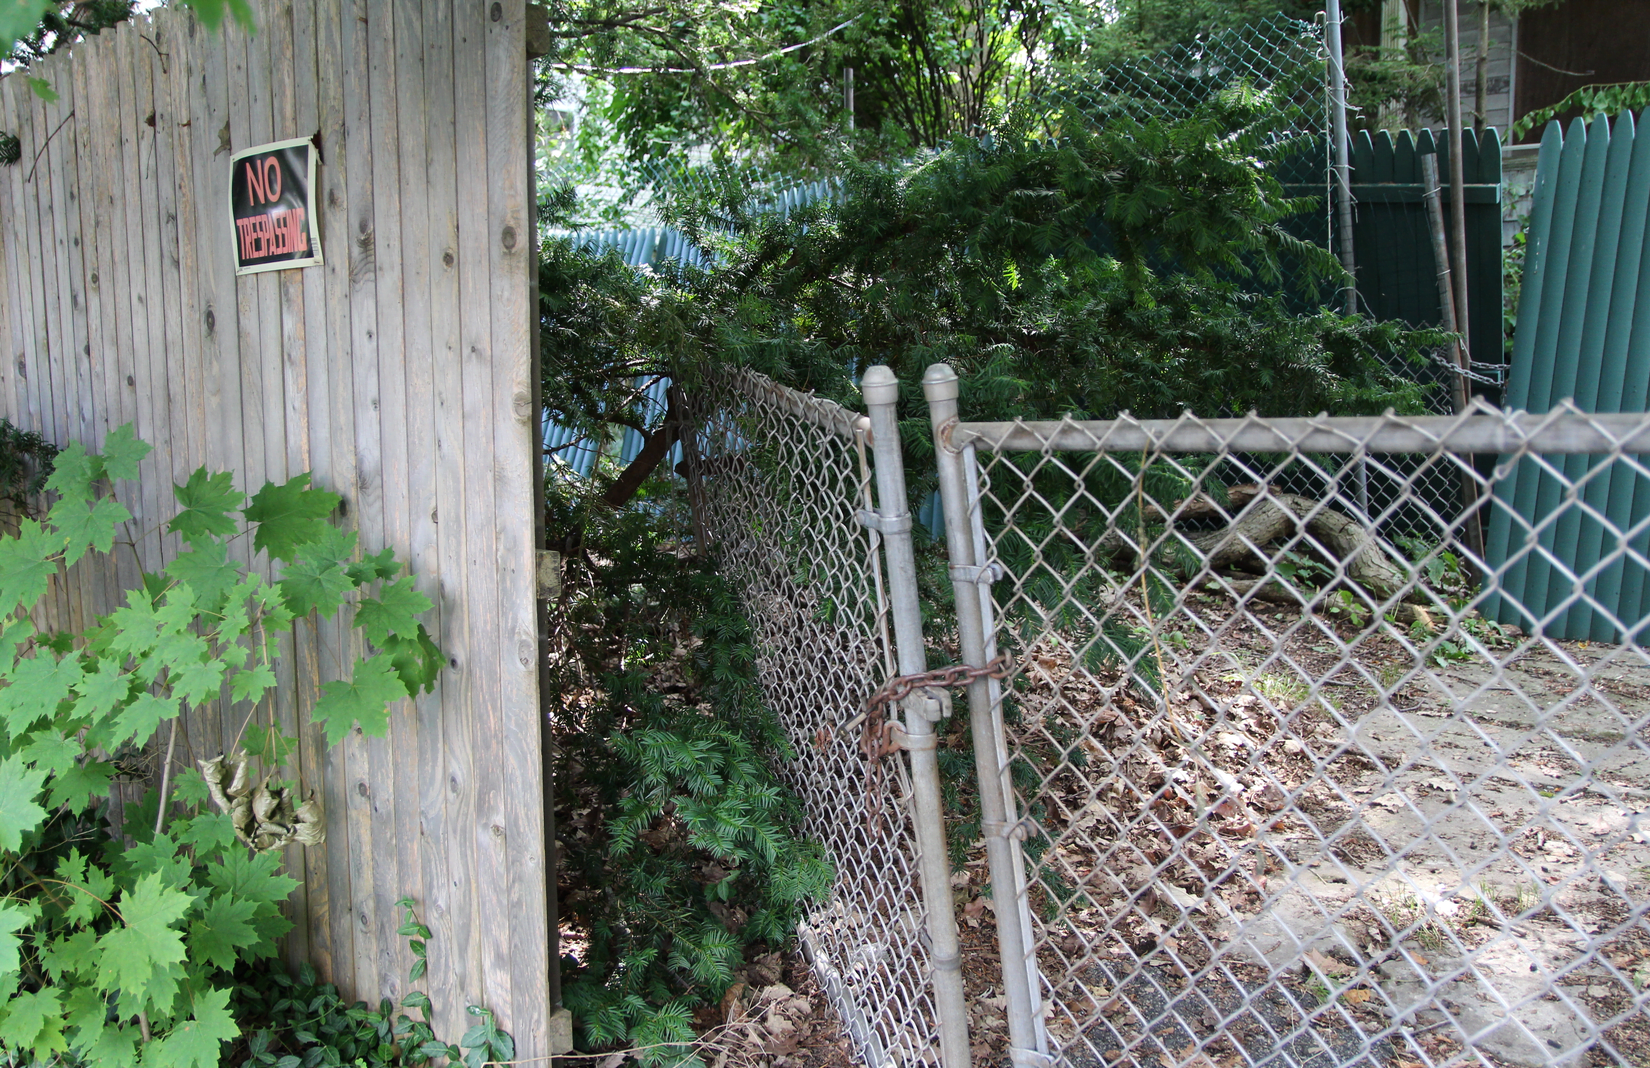 Gap between stockade fence and chain link gate at 46 Mead Ave. July 20, 2019 Photo: Leslie Yager